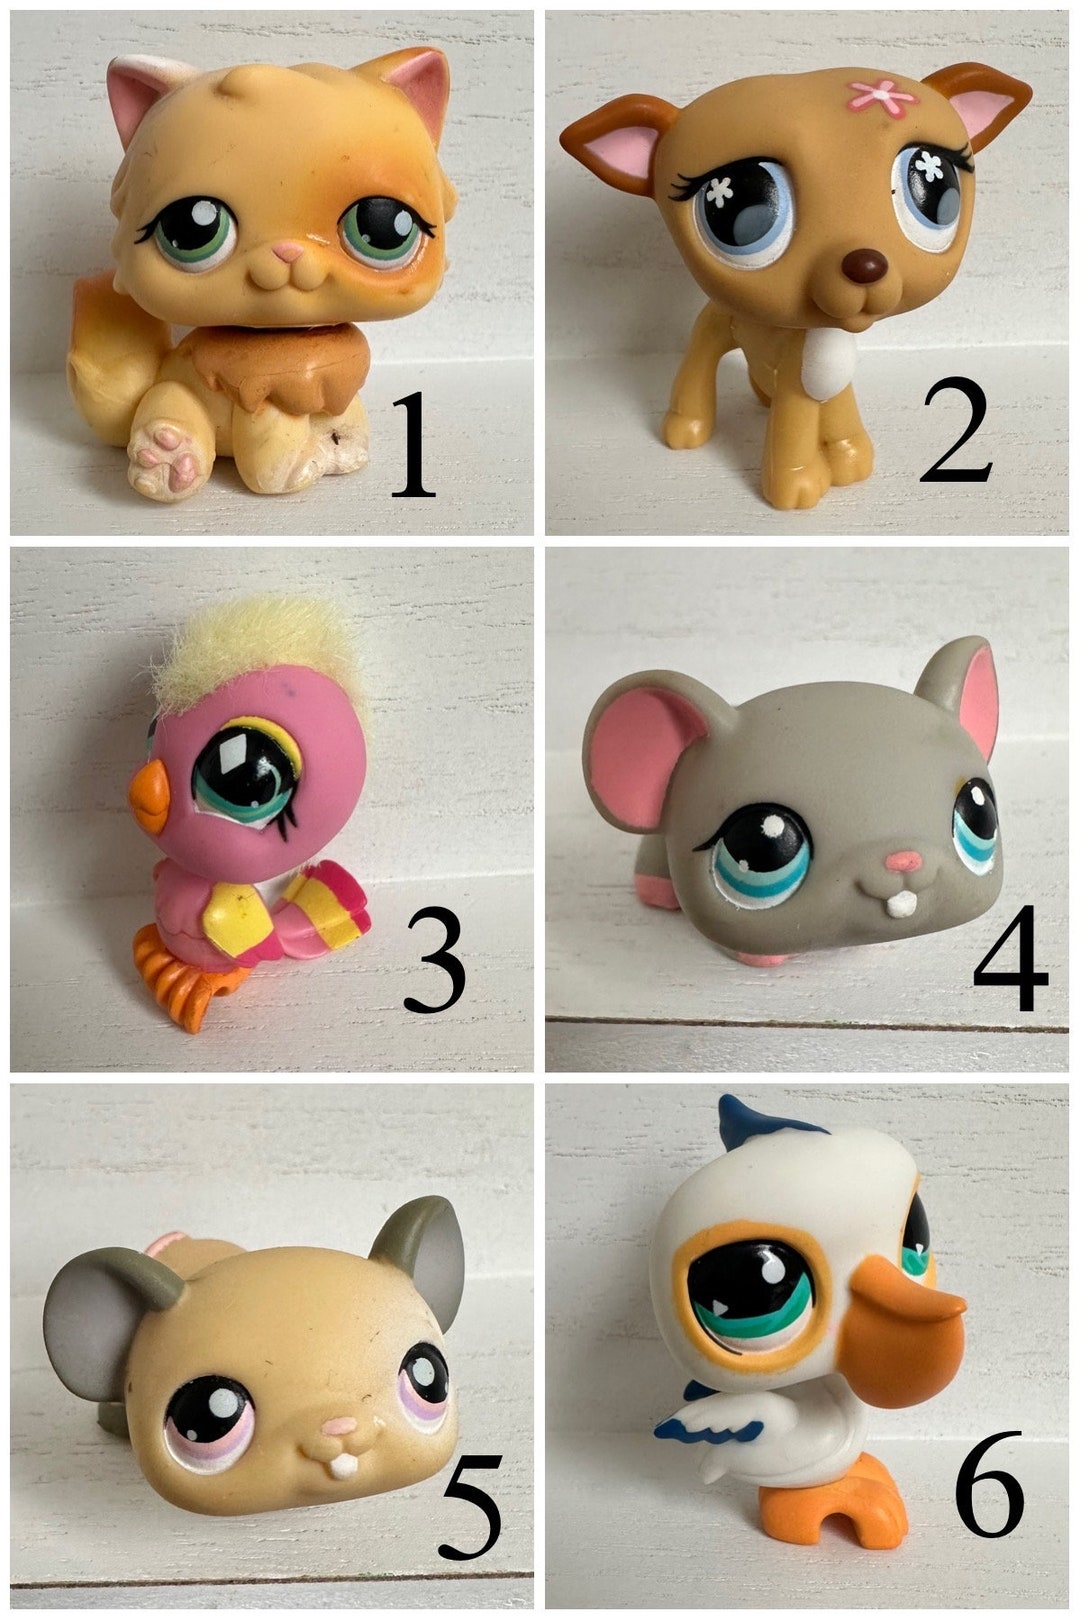 4 Animalsauthentic Littlest Pet Shop Blind Bag 4 Animals Included No  Doubles Dogs, Cats, Frogs, Fish, Mice, Monkeys, Horses, Turtles 